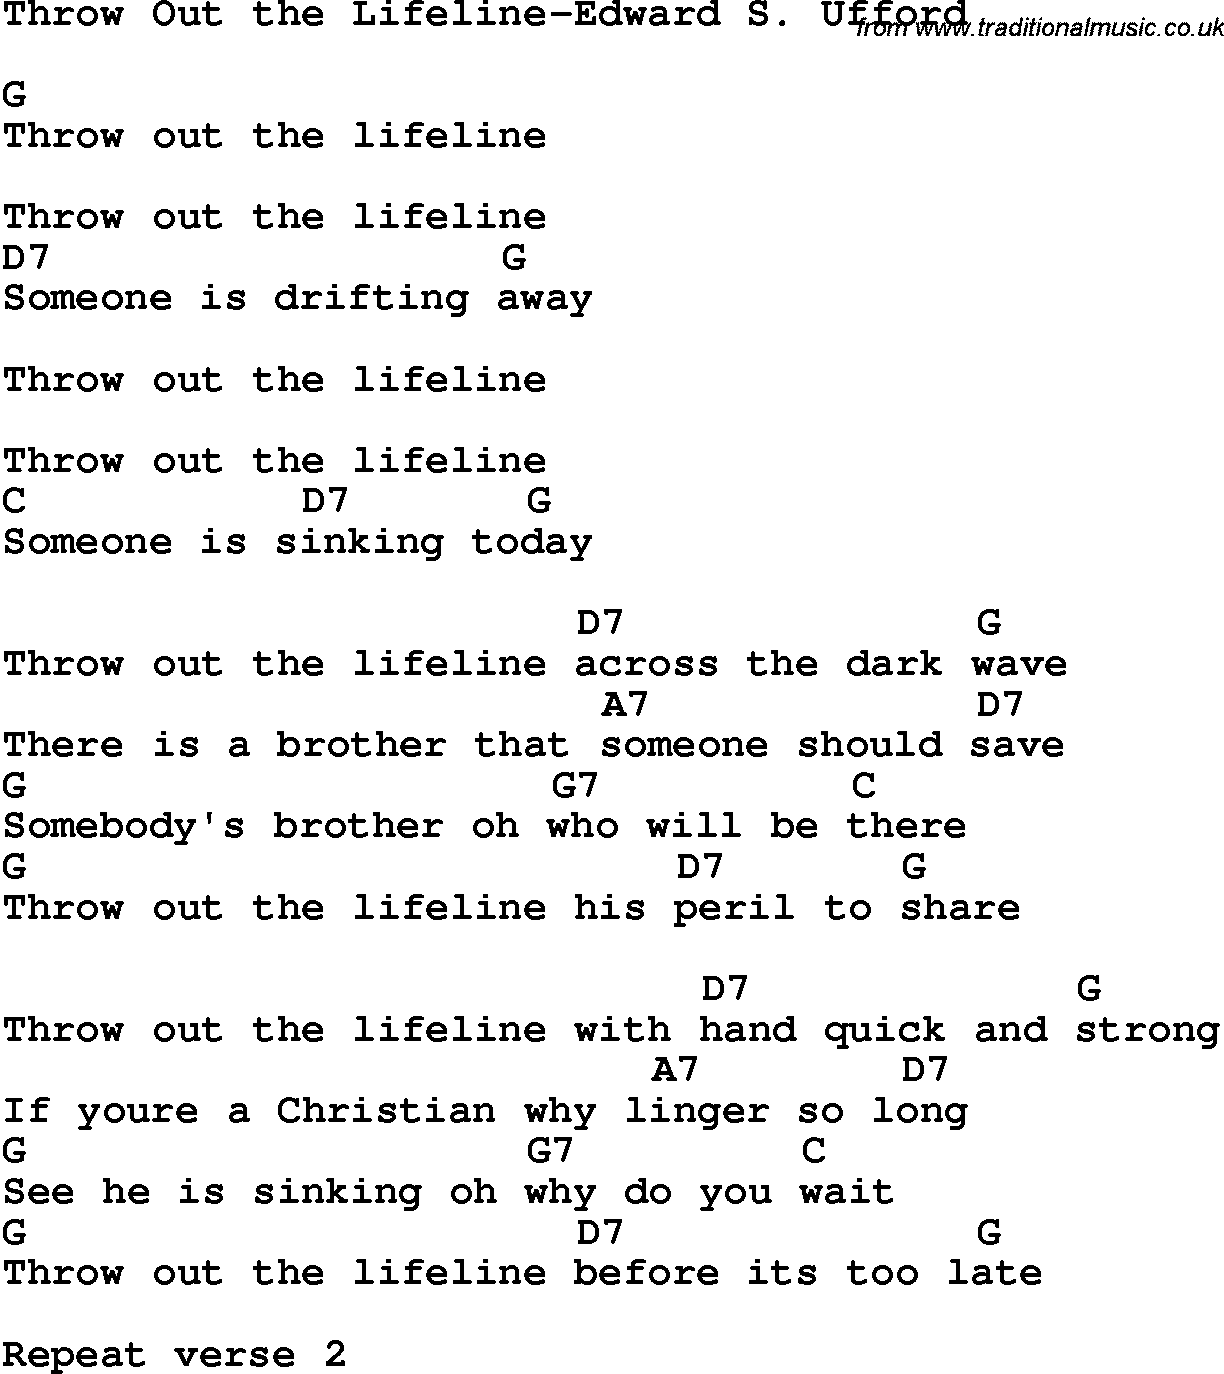 Country, Southern and Bluegrass Gospel Song Throw Out the Lifeline-Edward S Ufford lyrics and chords